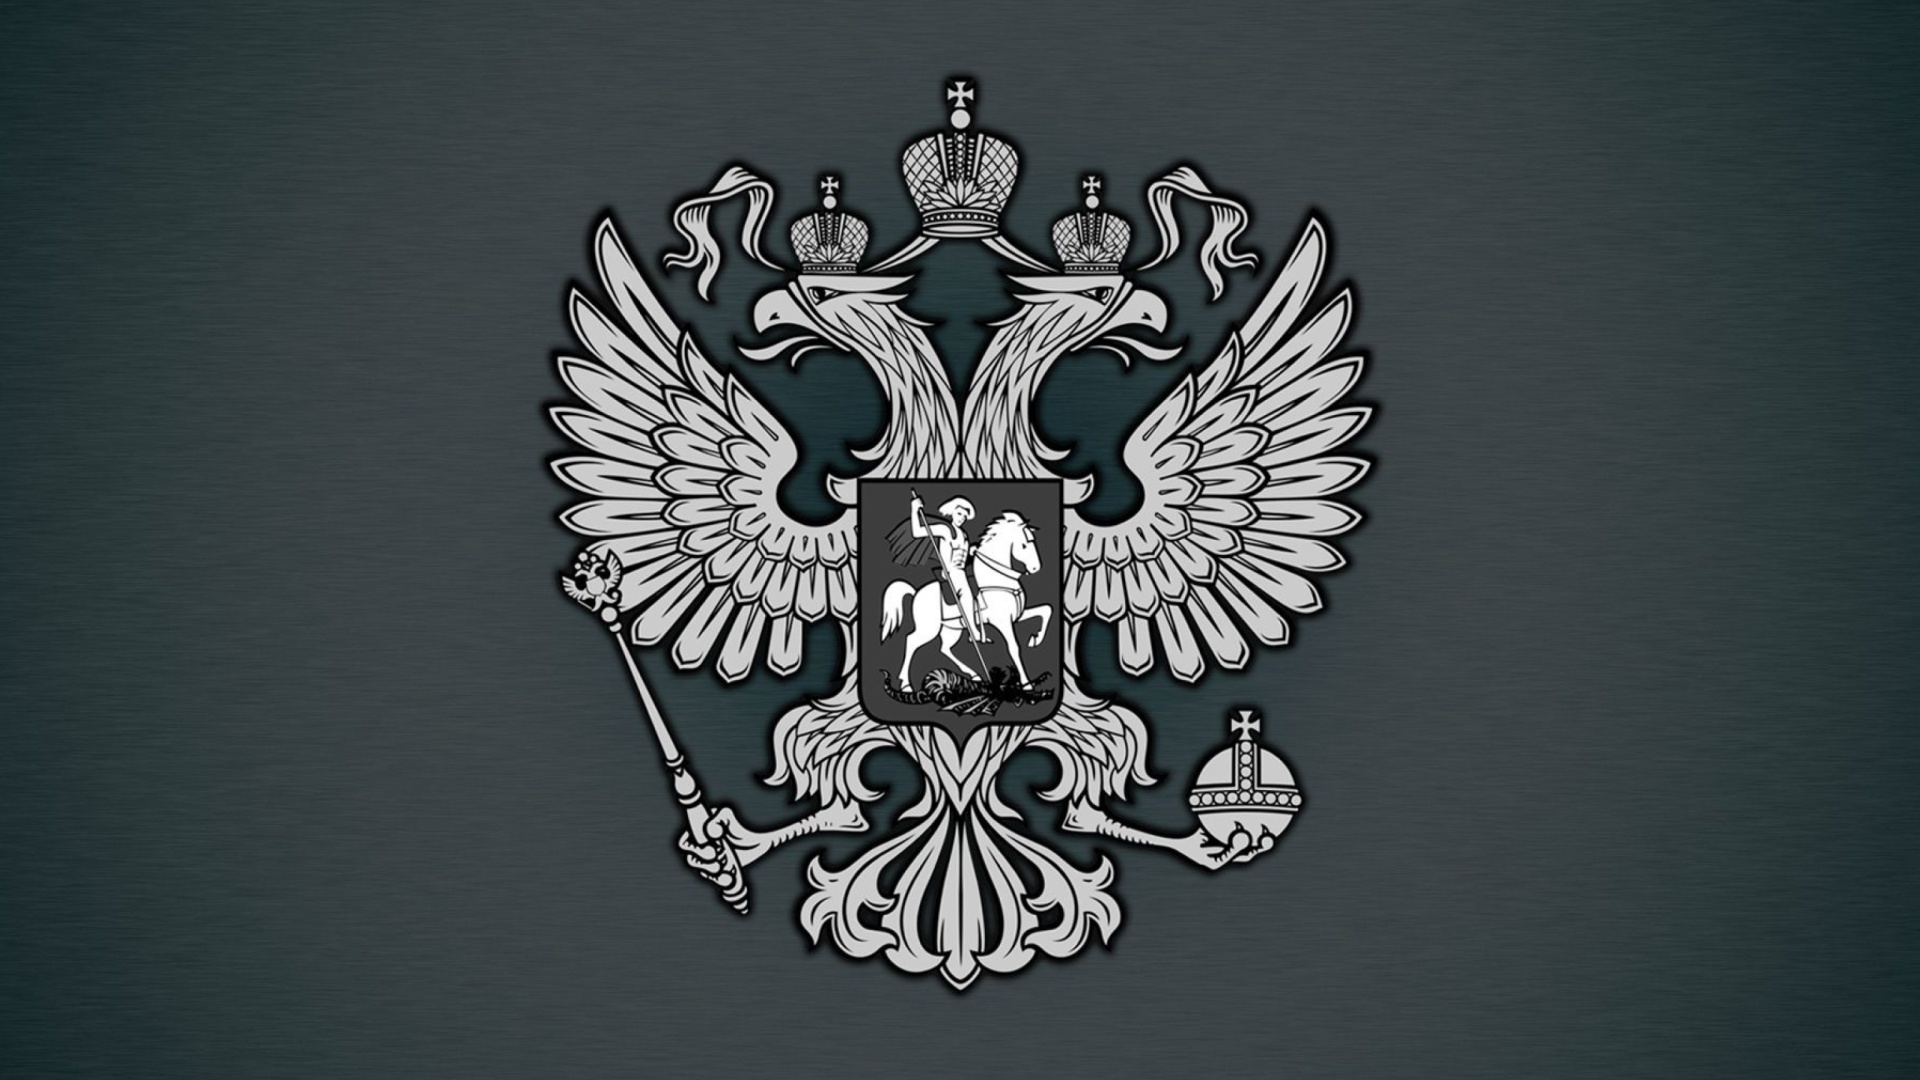 Das Coat of arms of Russia Wallpaper 1920x1080